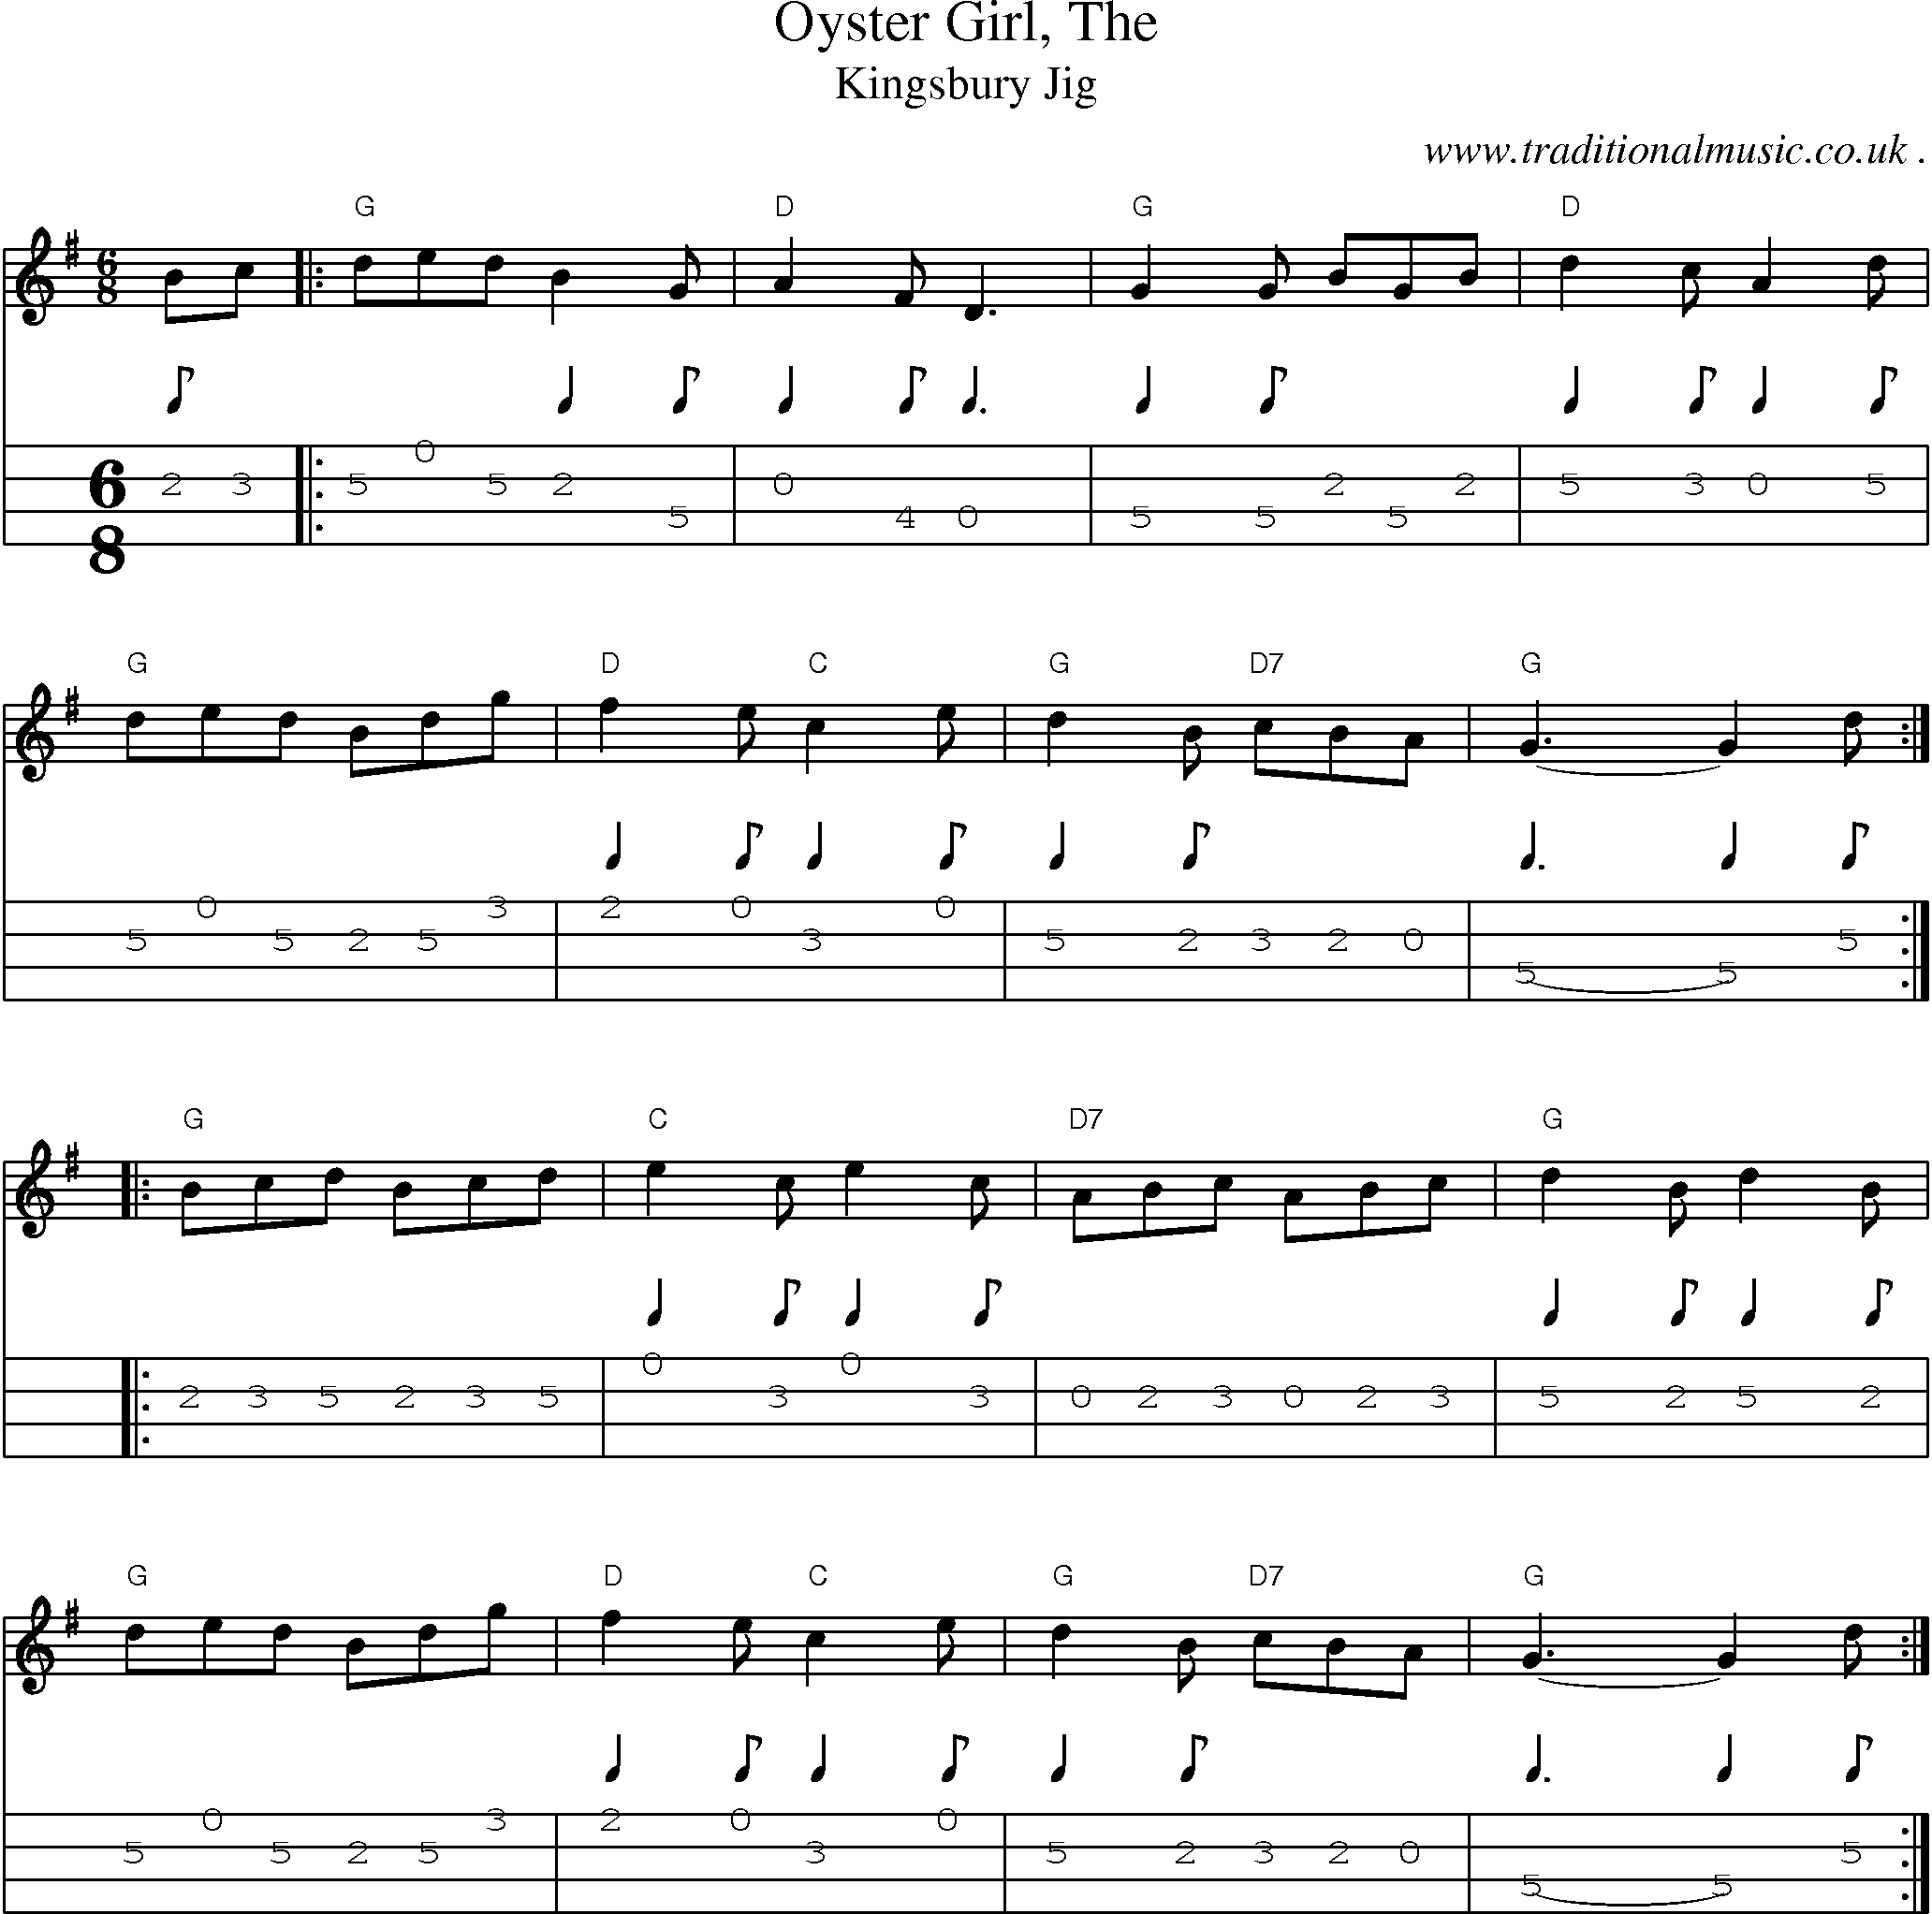 Music Score and Guitar Tabs for Oyster Girl The